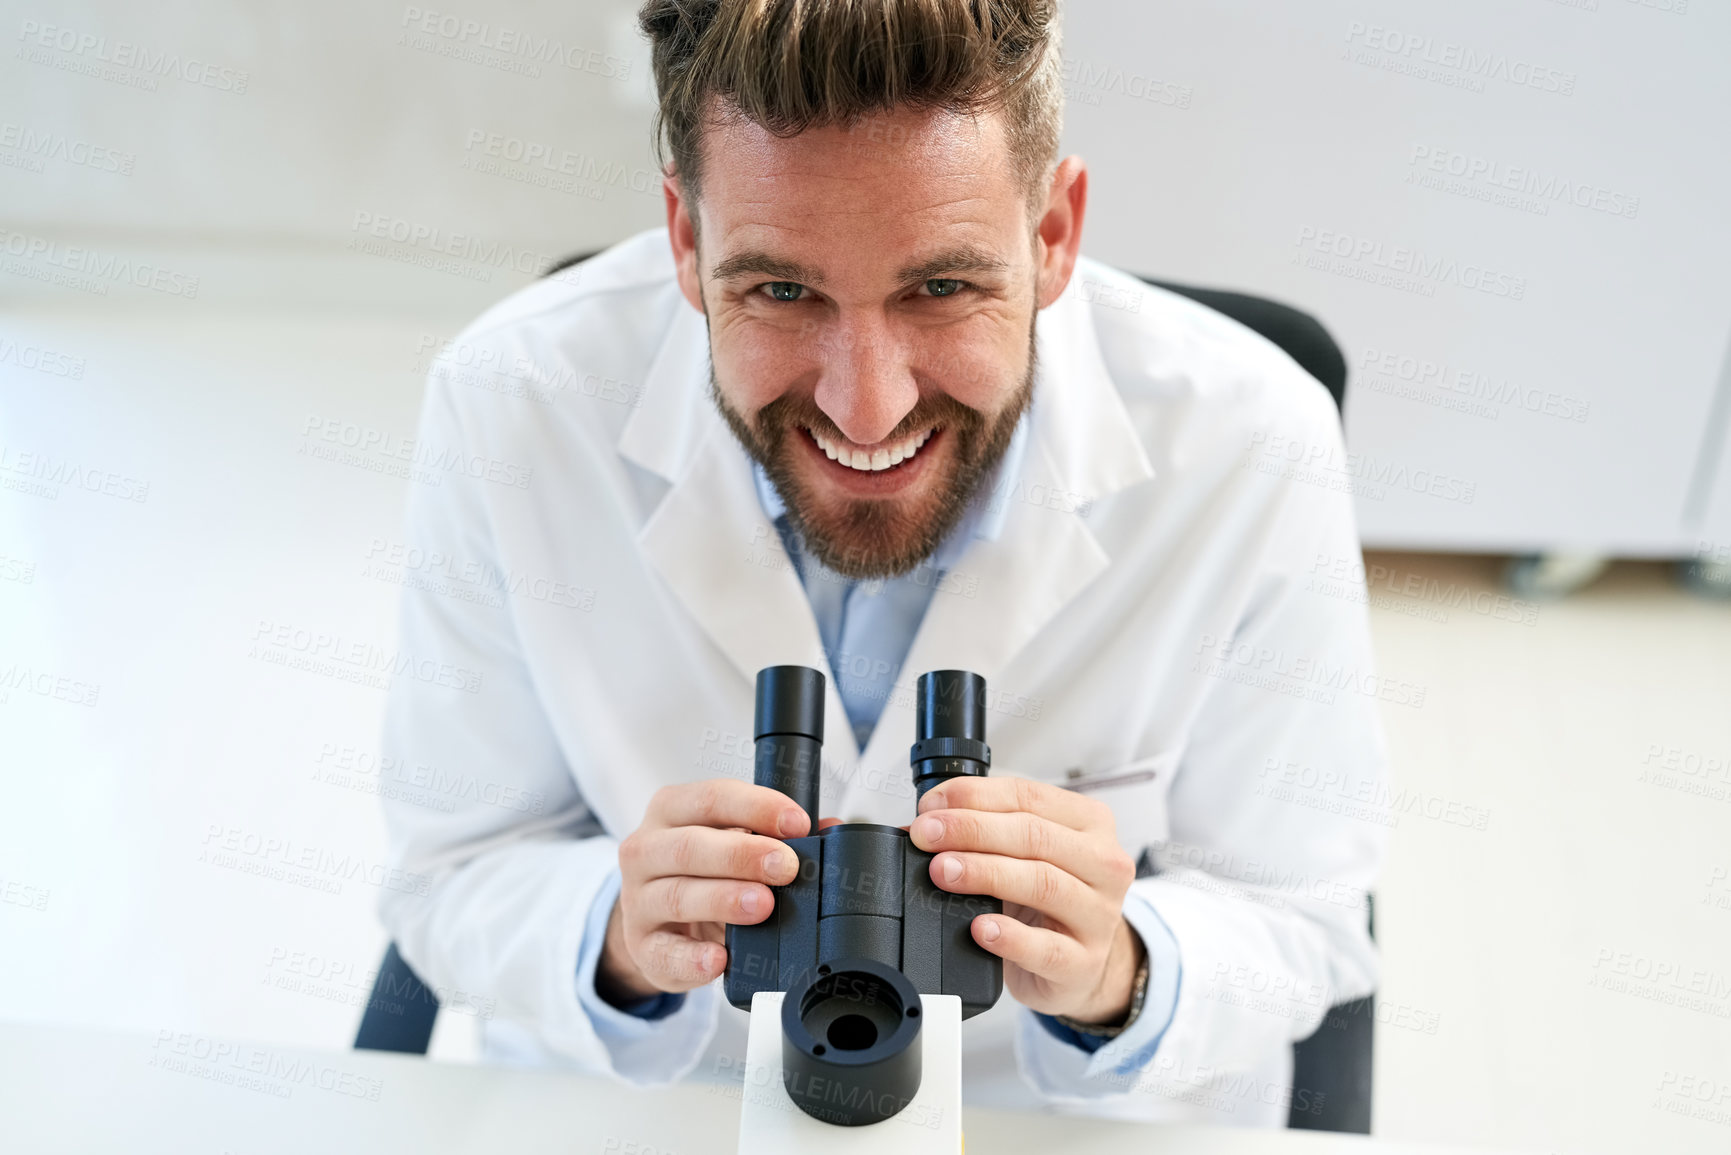 Buy stock photo Portrait of a male scientist using a microscope in a lab